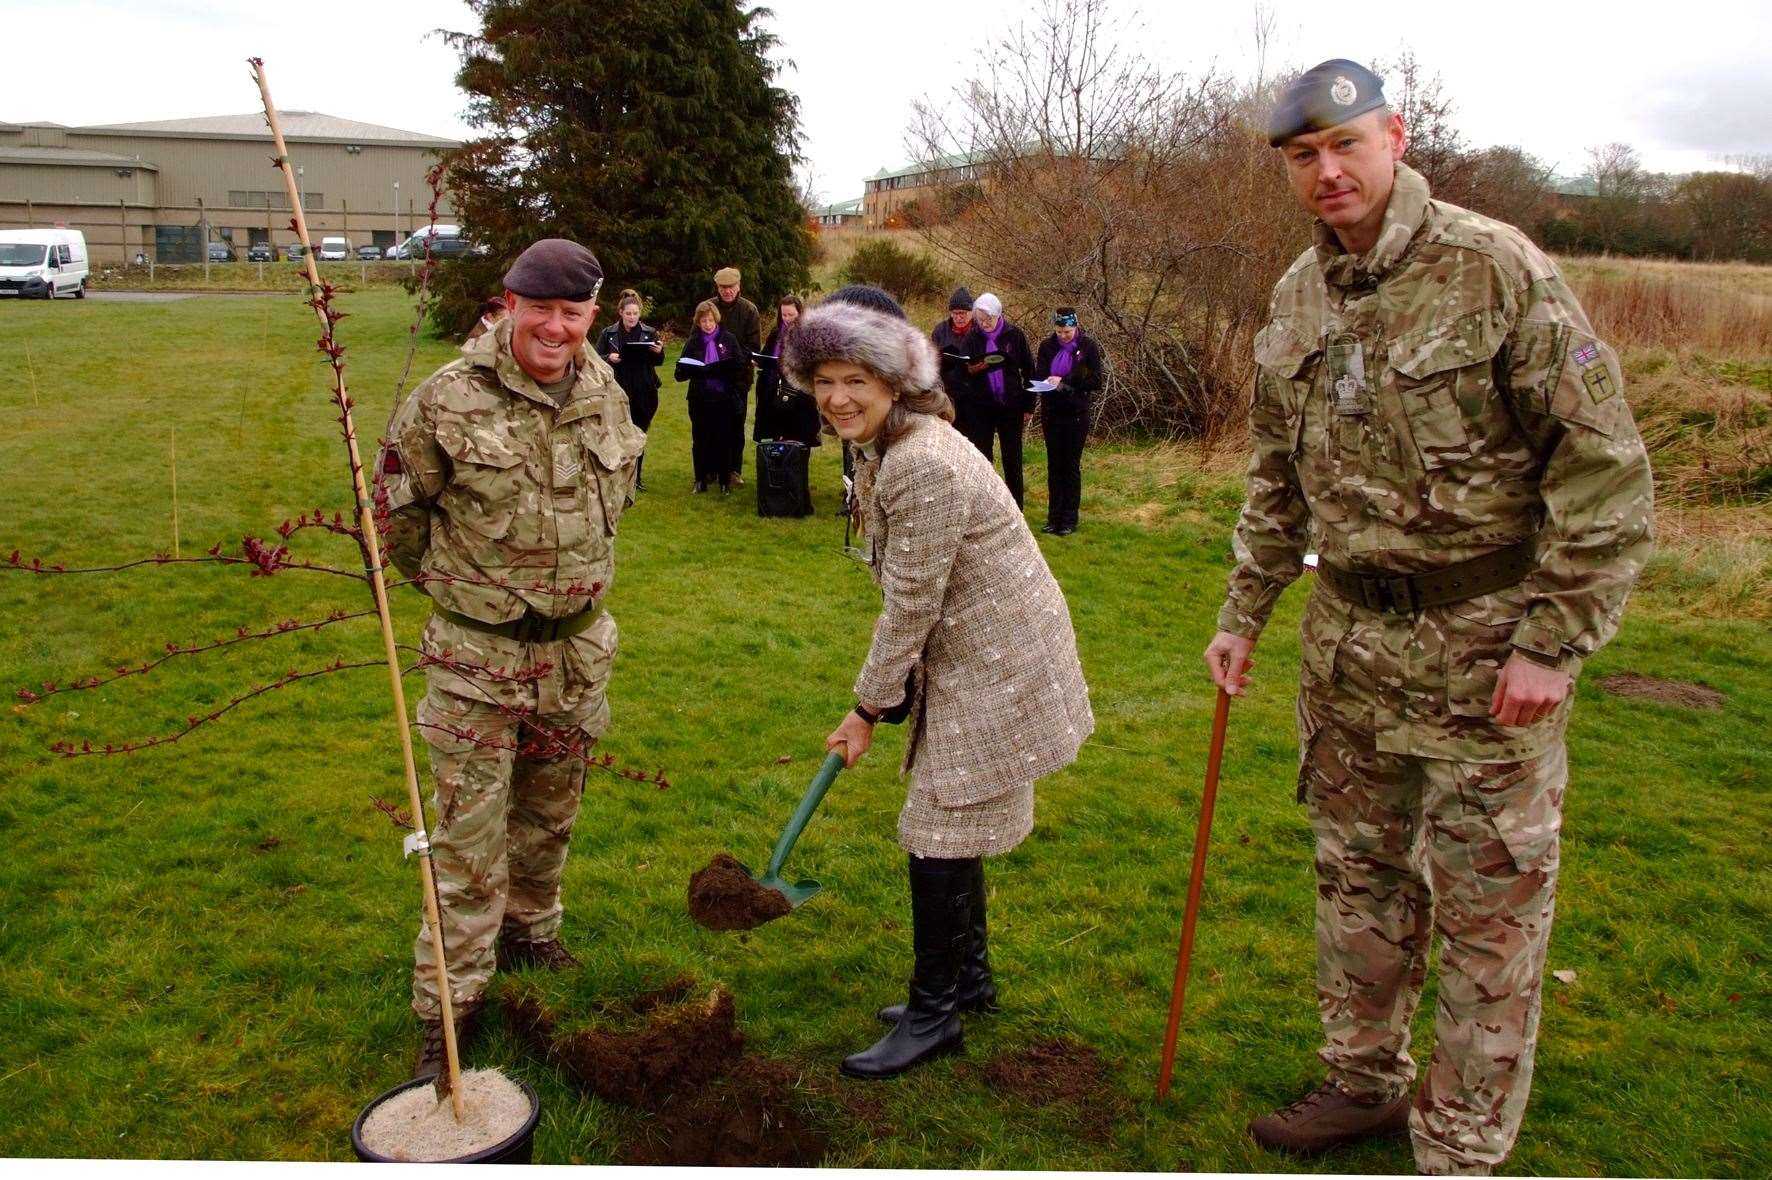 SSgt Long-Melton and Regimental Sgt Major Terris with DL Sue Finnegan who planted the first tree.